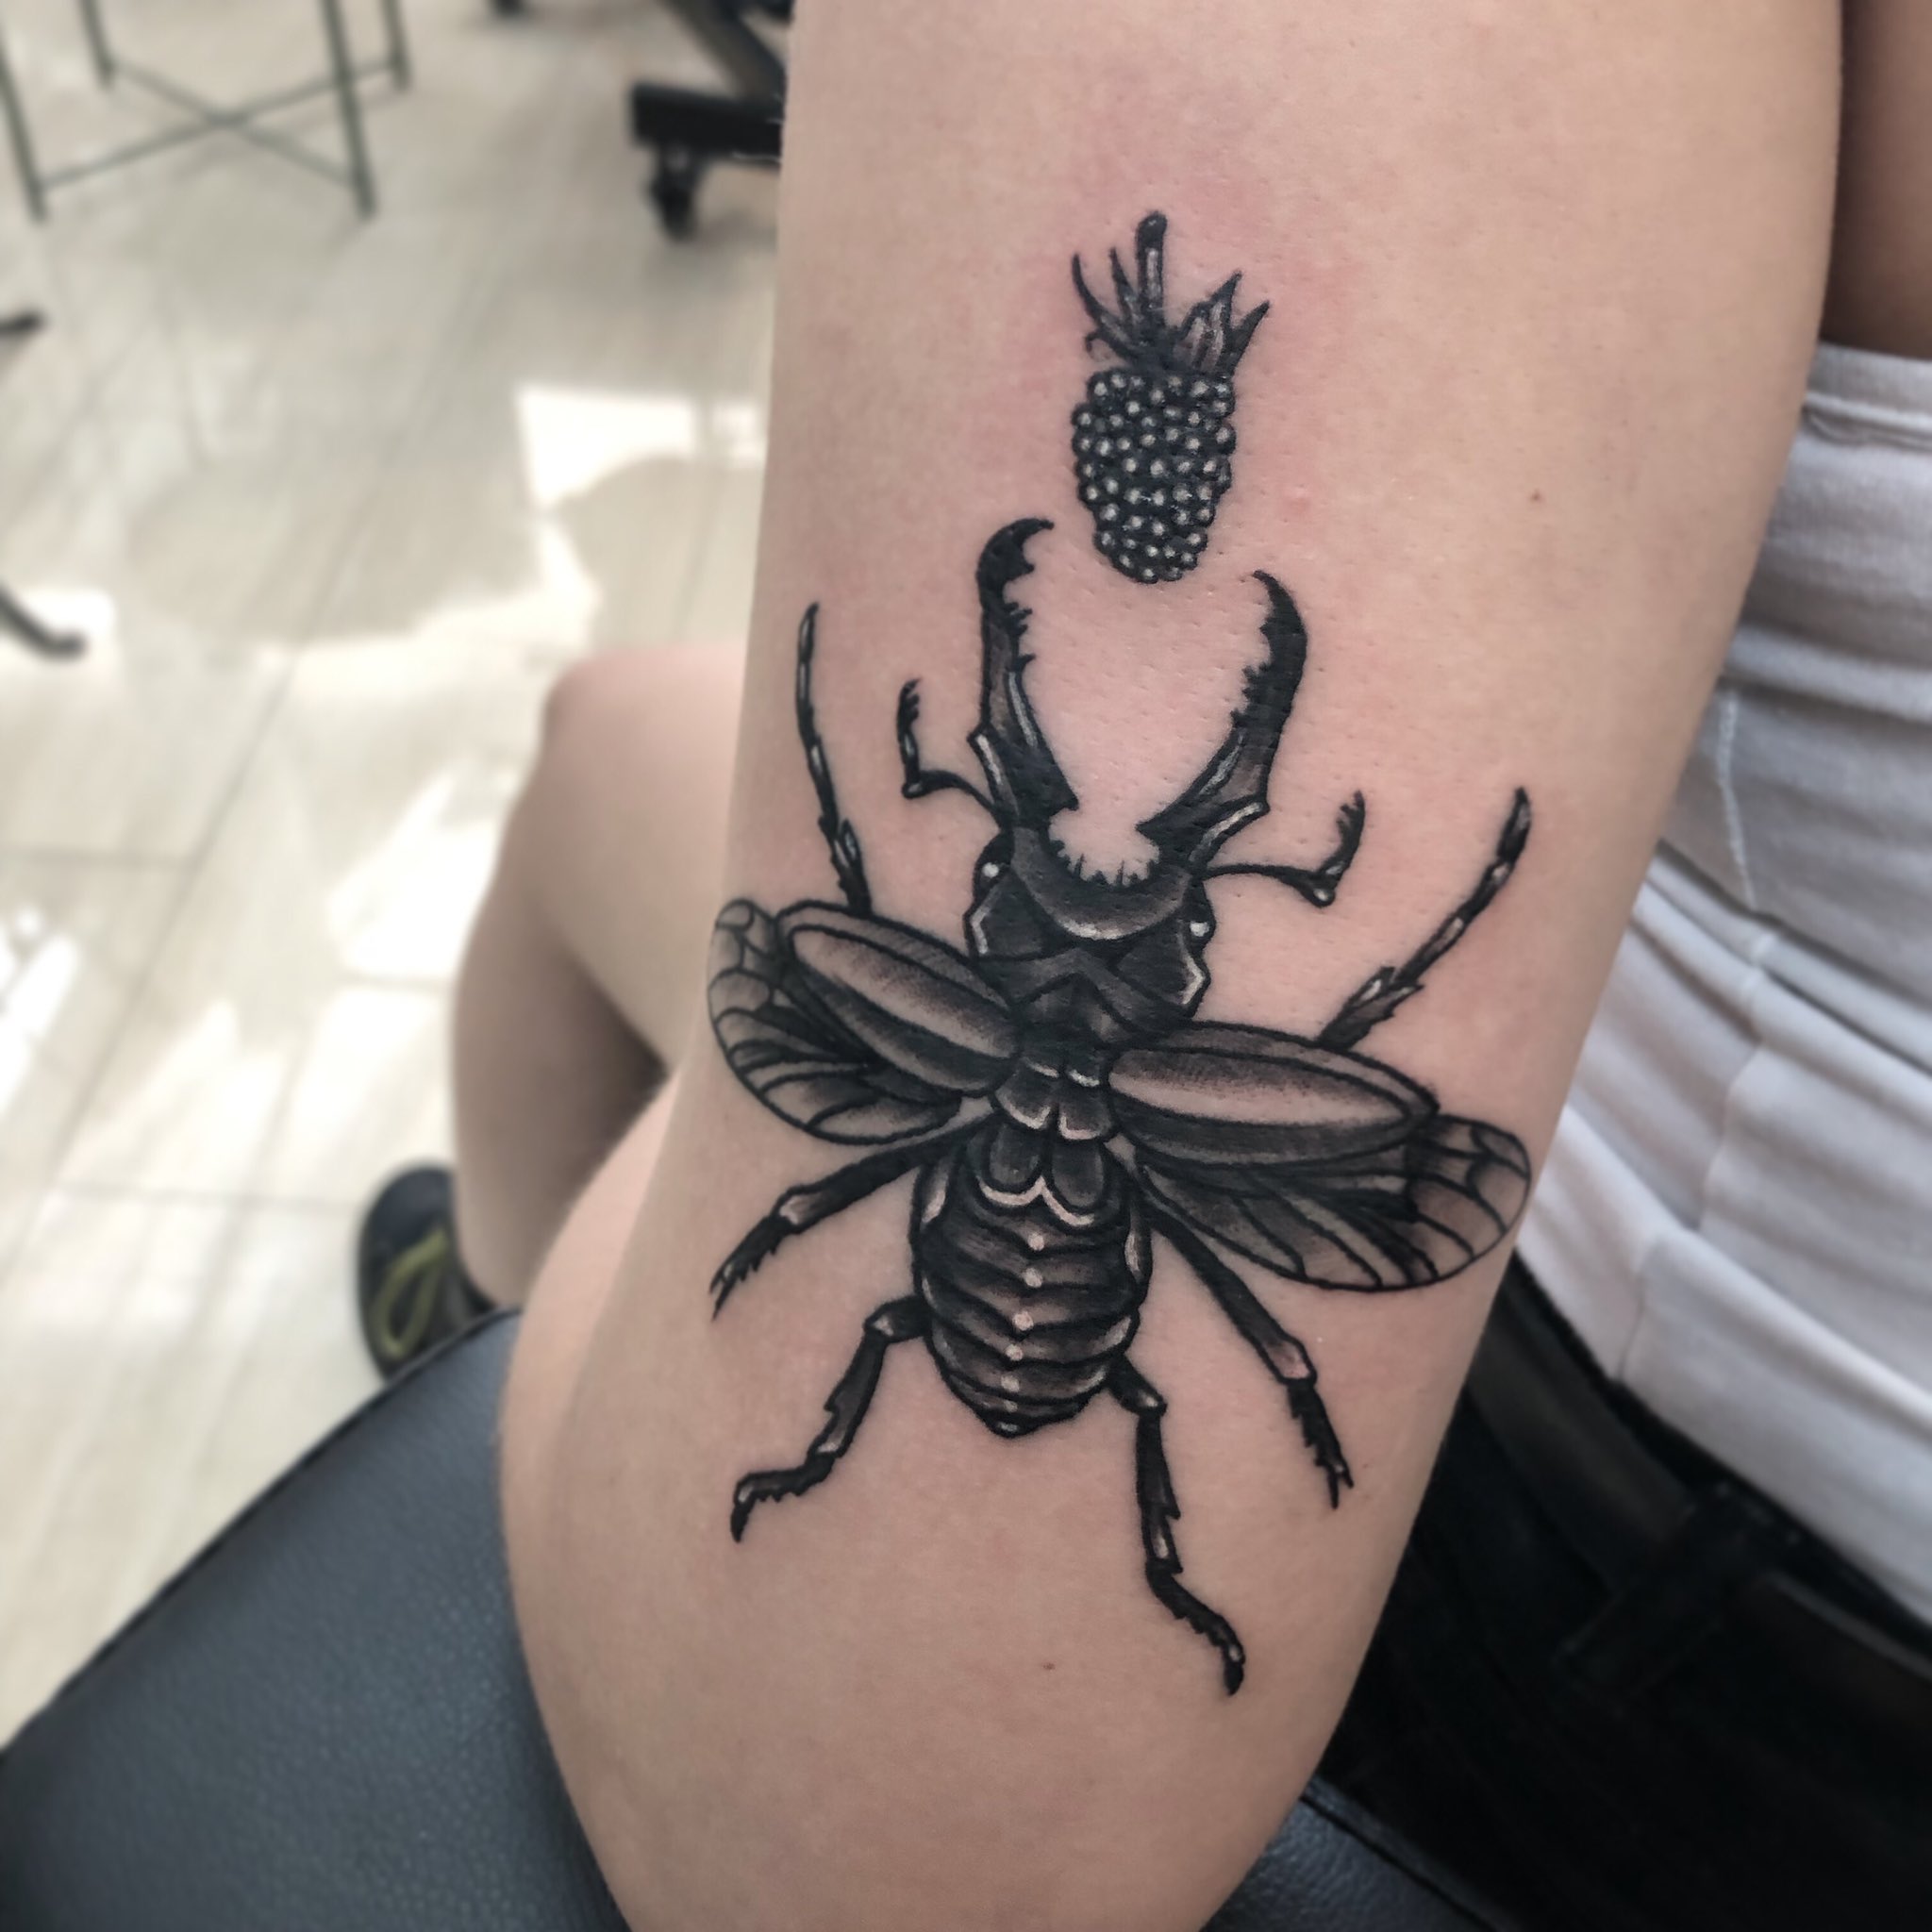 Grand Beetle SemiPermanent Tattoo Lasts 12 weeks Painless and easy to  apply Organic ink Browse more or create your own  Inkbox   SemiPermanent Tattoos